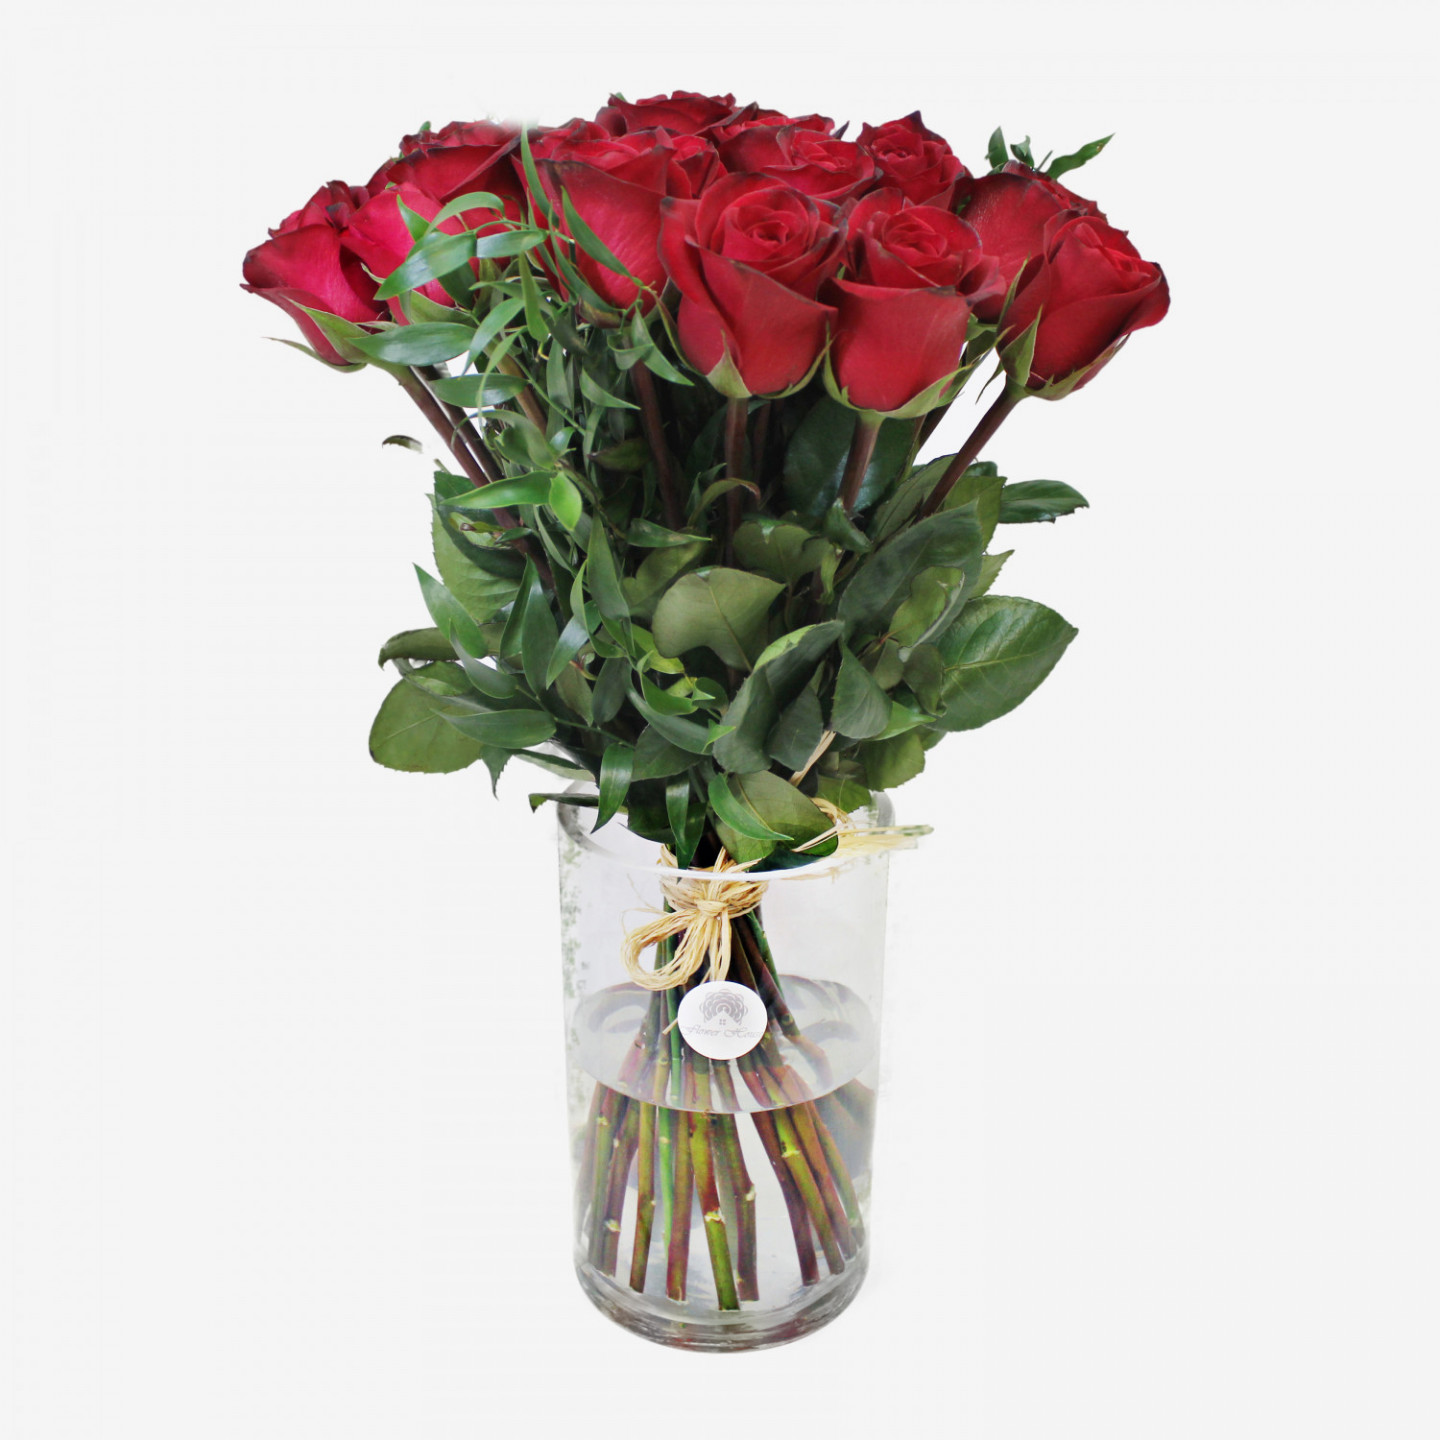 30 Red Freedom Roses Bouquet